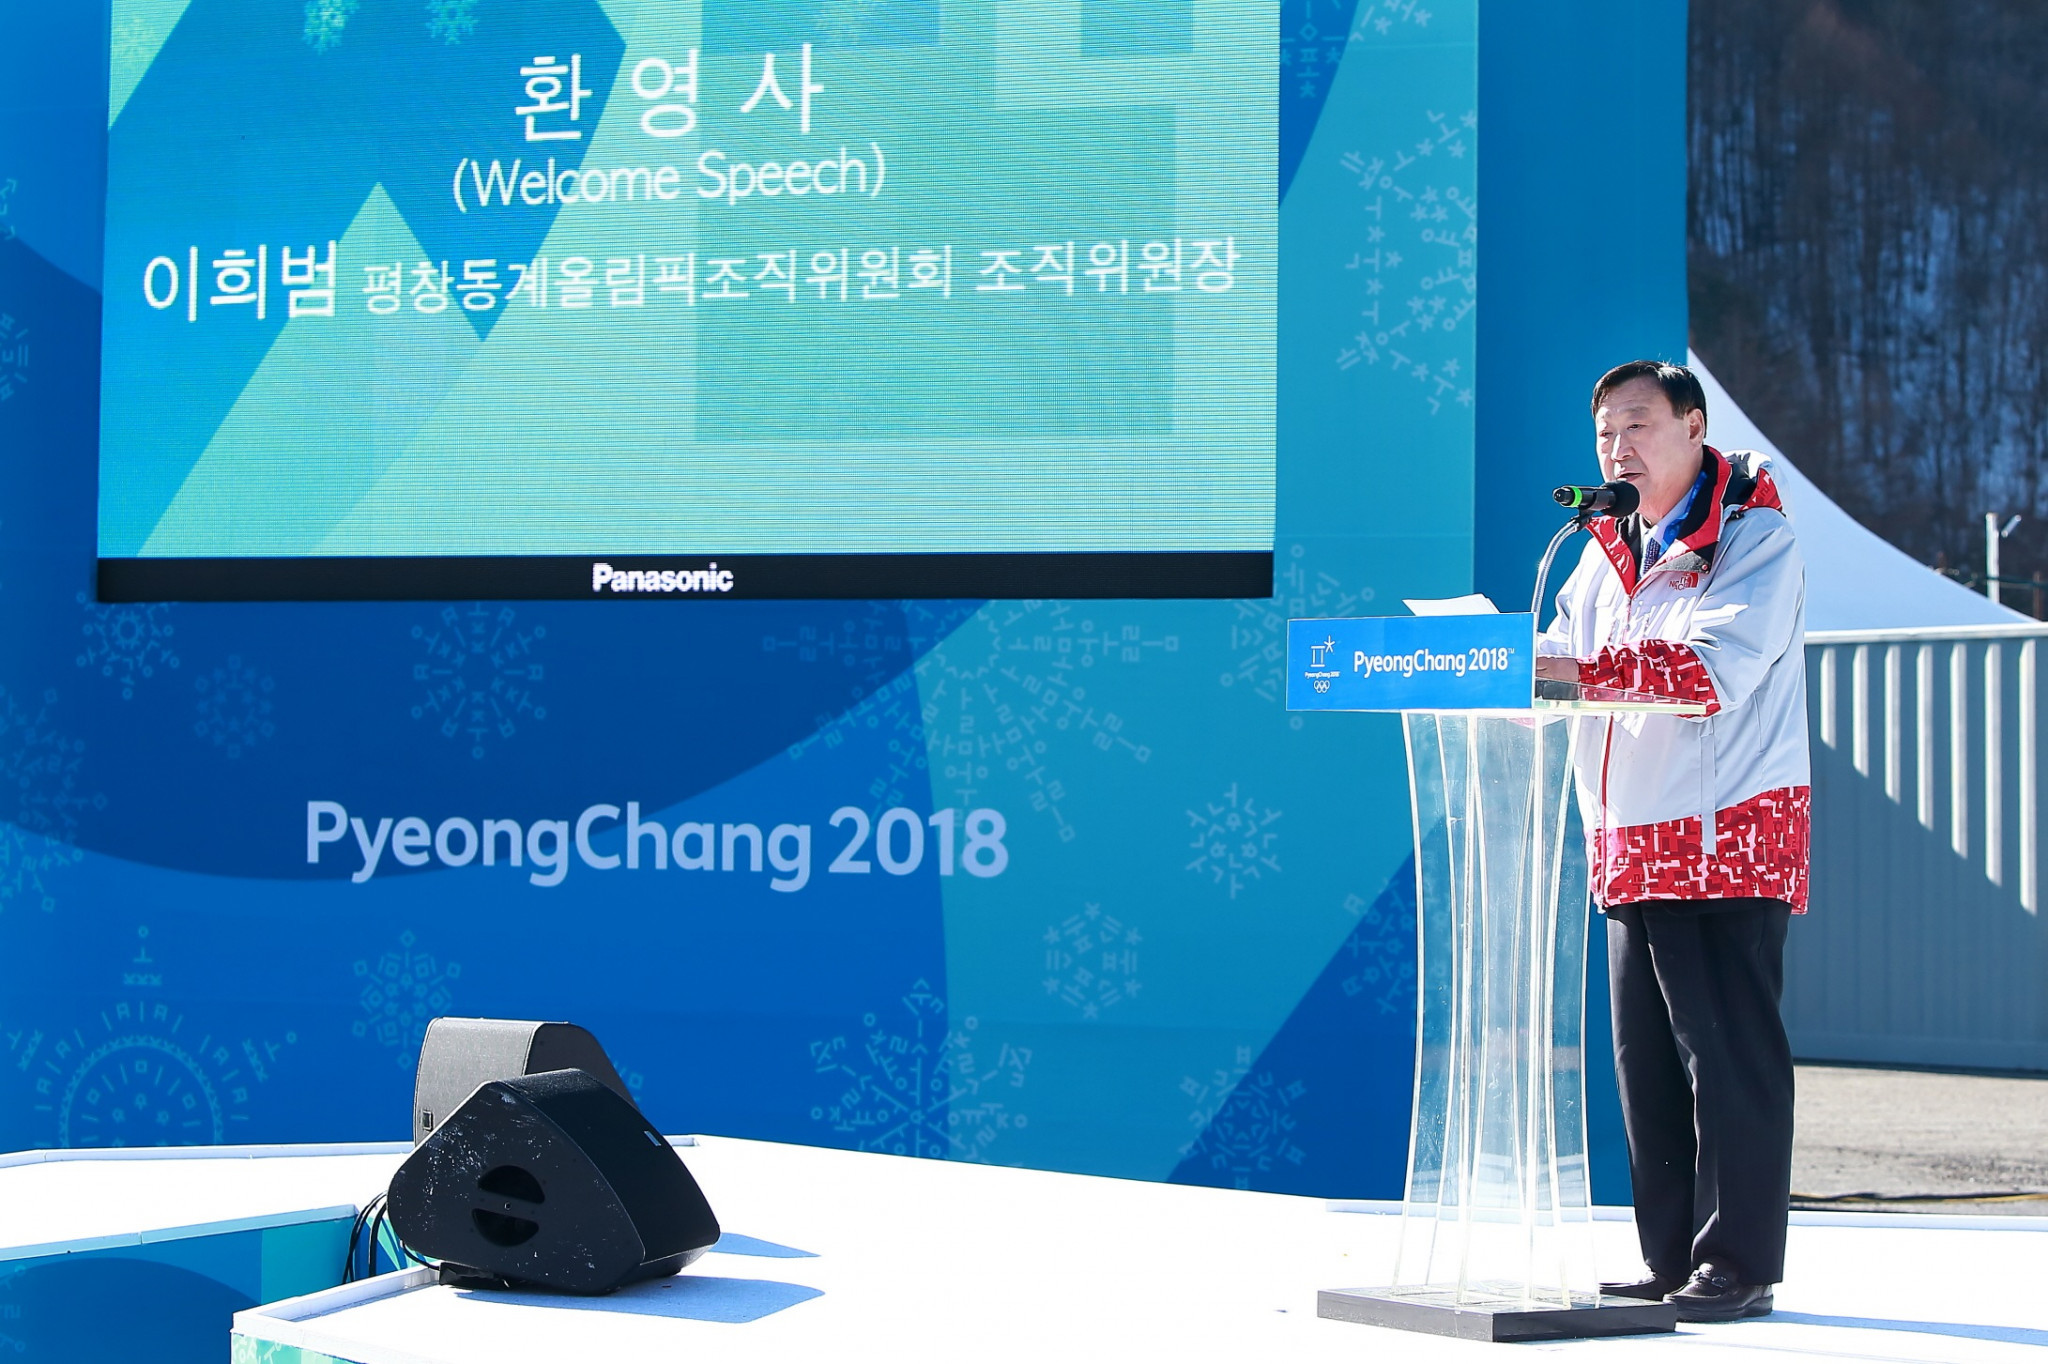 Pyeongchang and Gangneung Olympic Villages opened with ceremonies